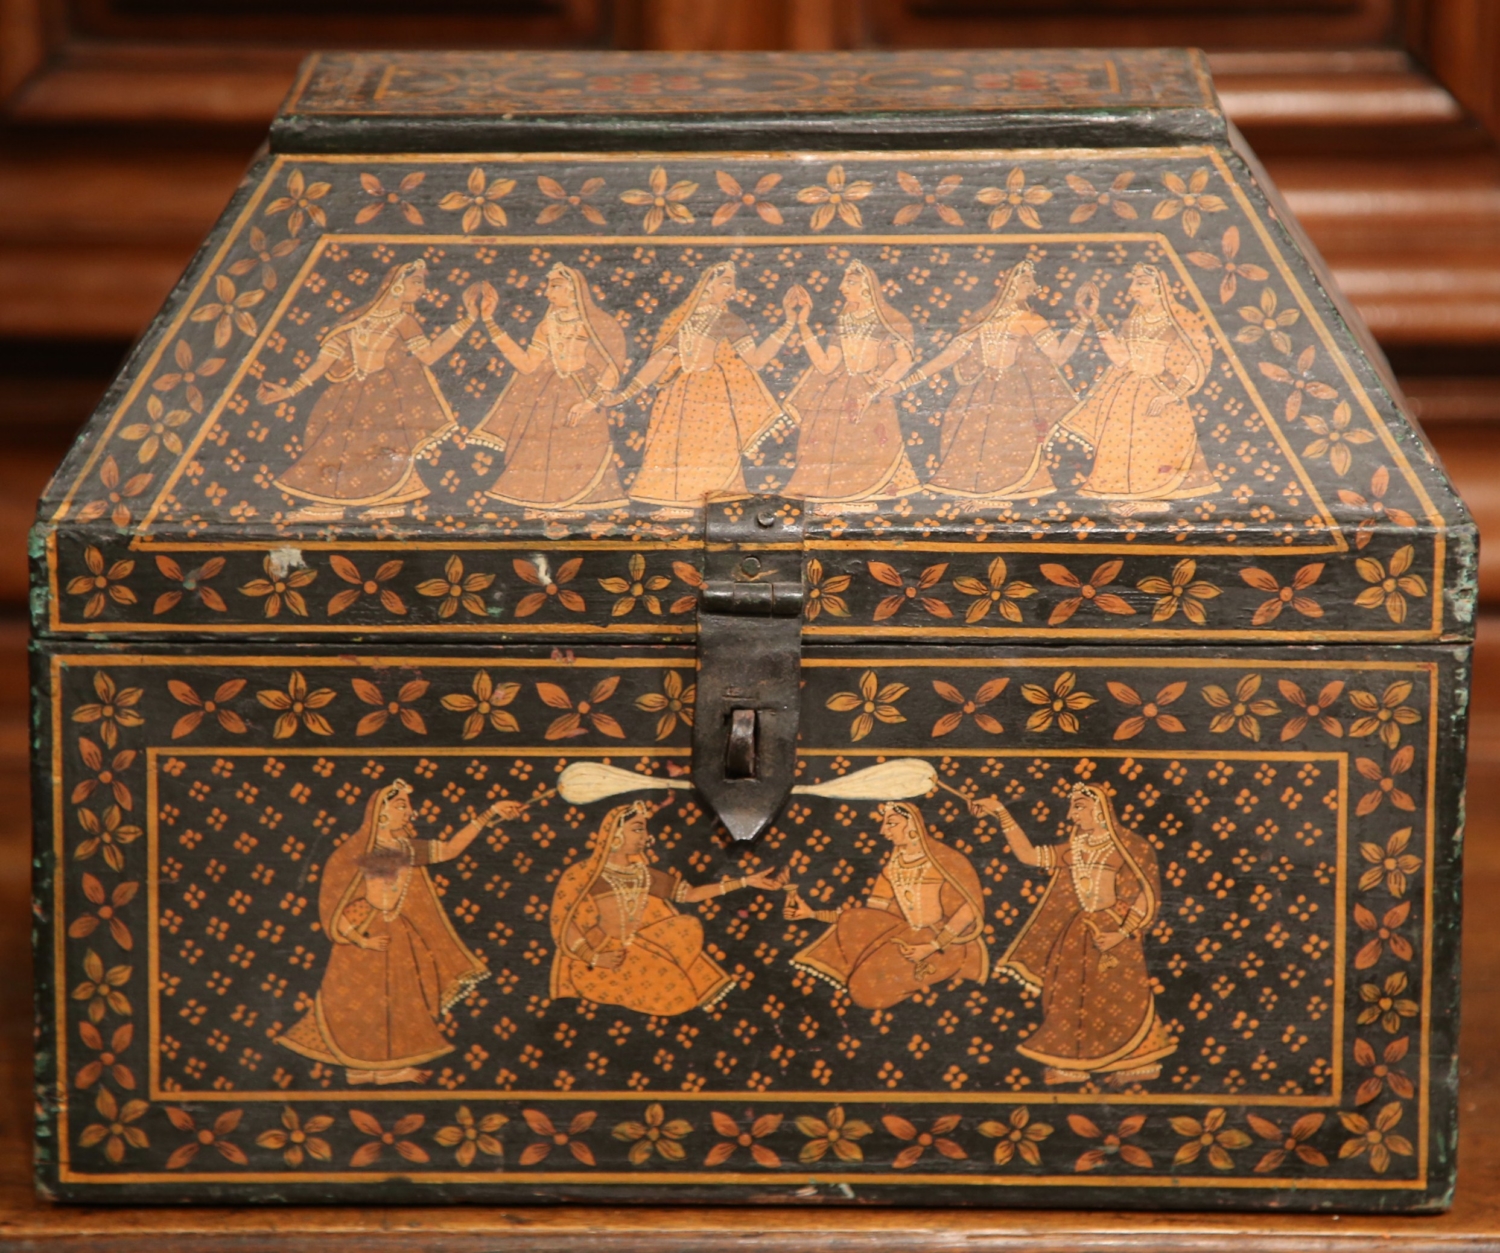 Large decorative box inspired by French 18th century – French Address